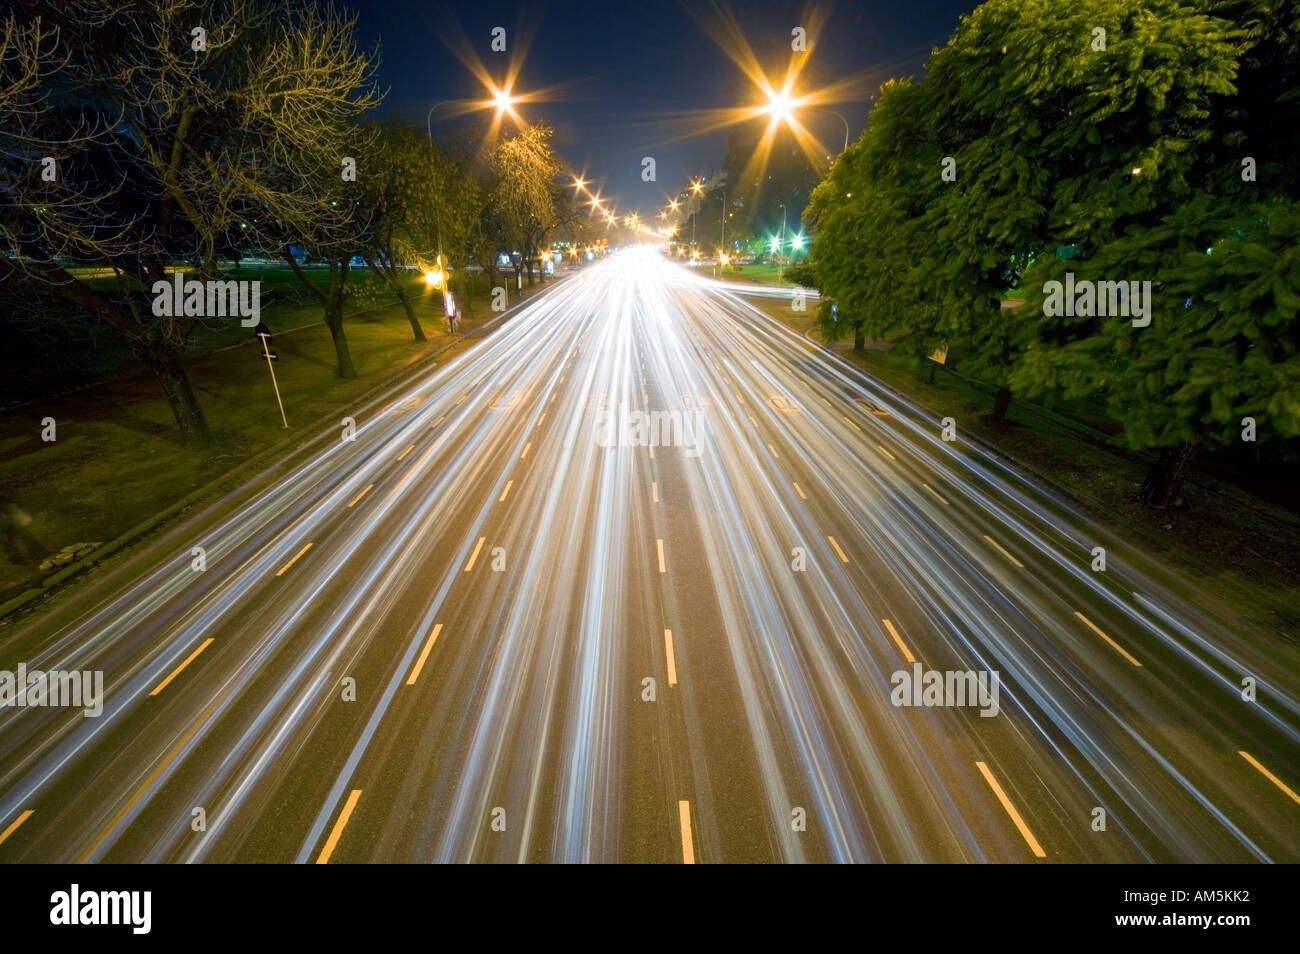 Buenos Aires - Avenida Figueroa Alcorta at night. Six lane urban roadway with long light trails. Slow shutter speed shutterspeed Stock Photo